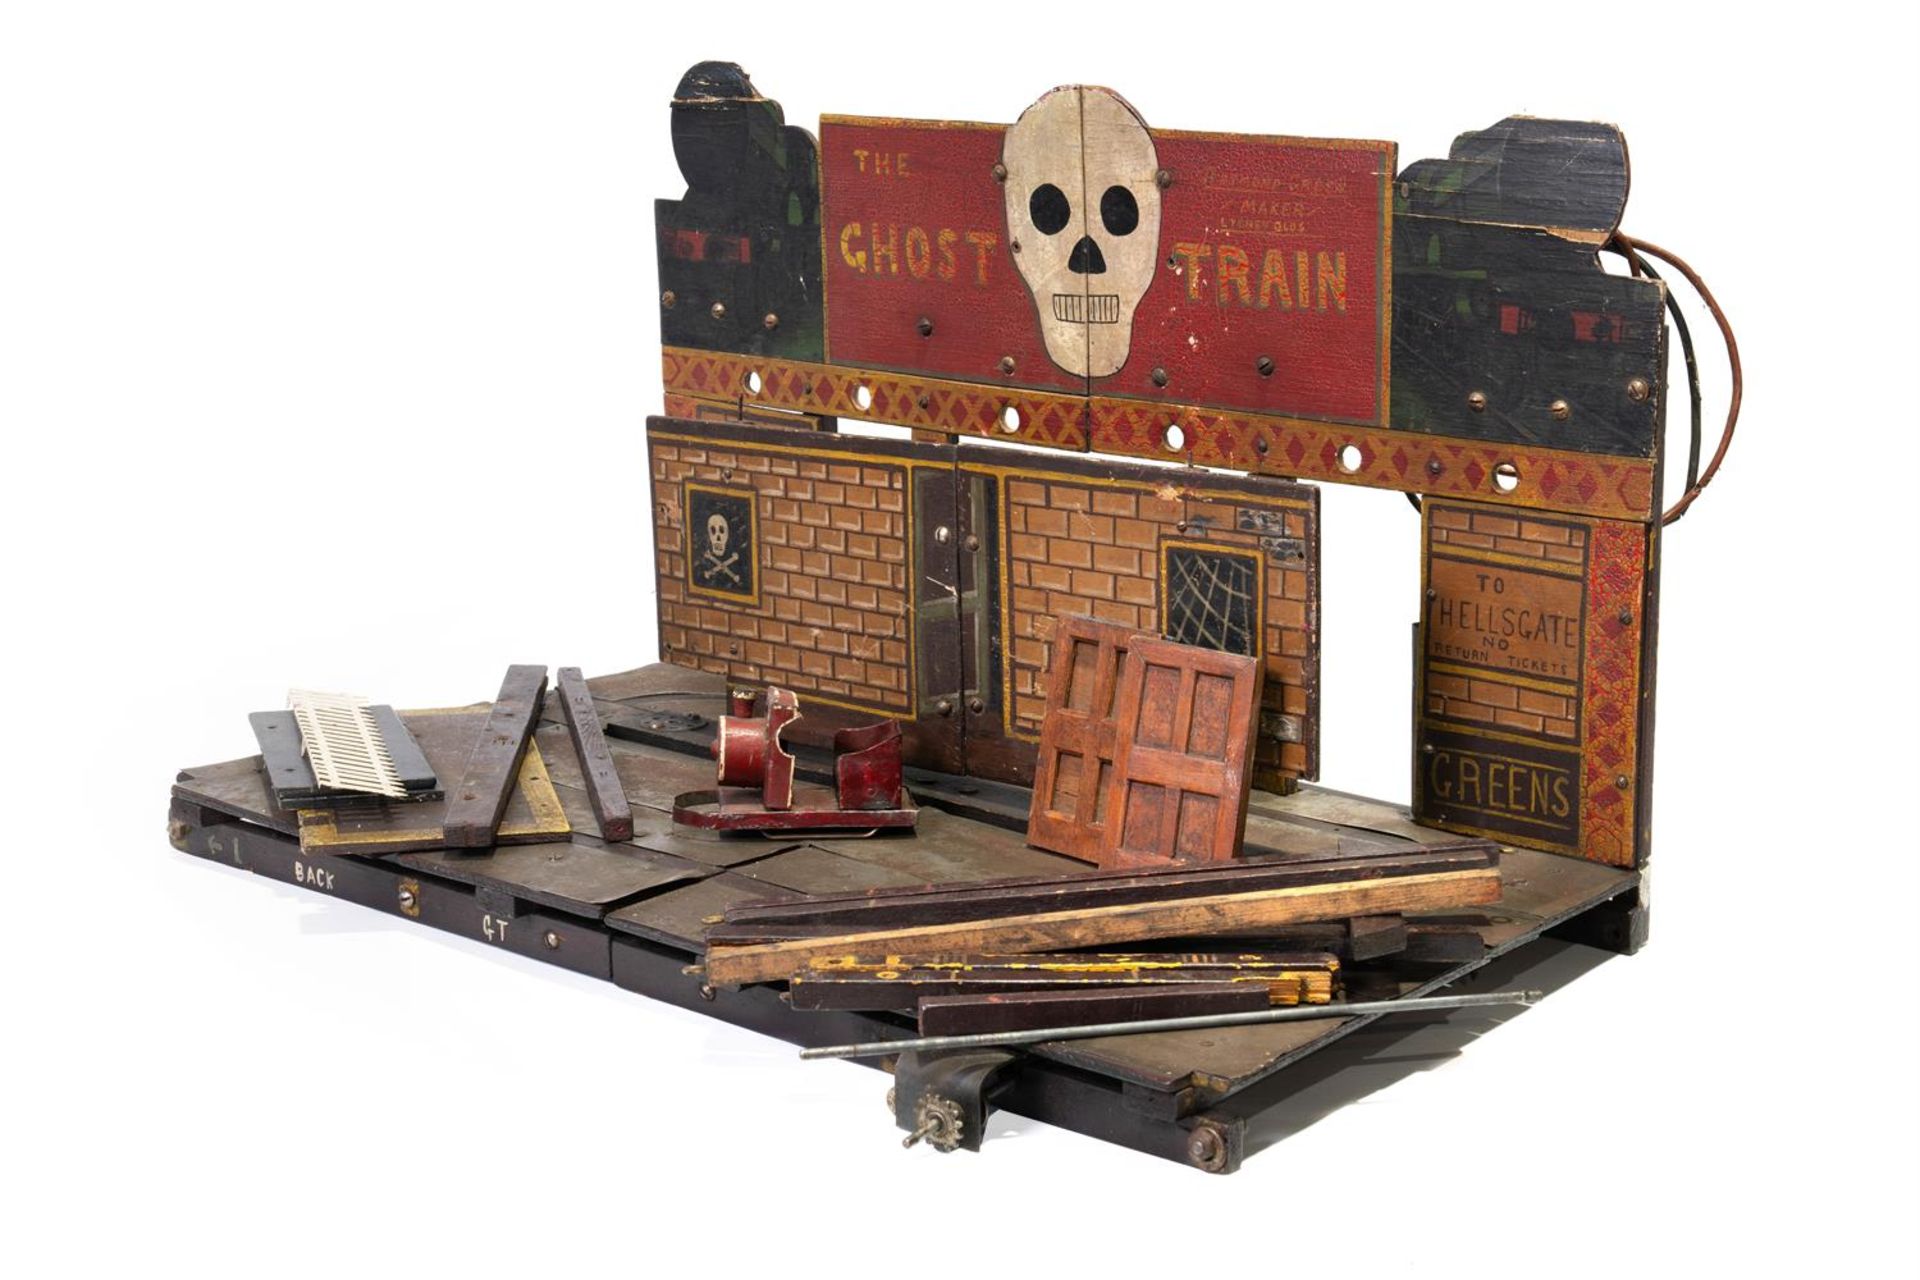 A SCRATCHBUILT PAINTED WOOD AND METAL SCALE MODEL AMUSEMENT GHOST TRAIN RIDE, 20TH CENTURY - Image 3 of 5